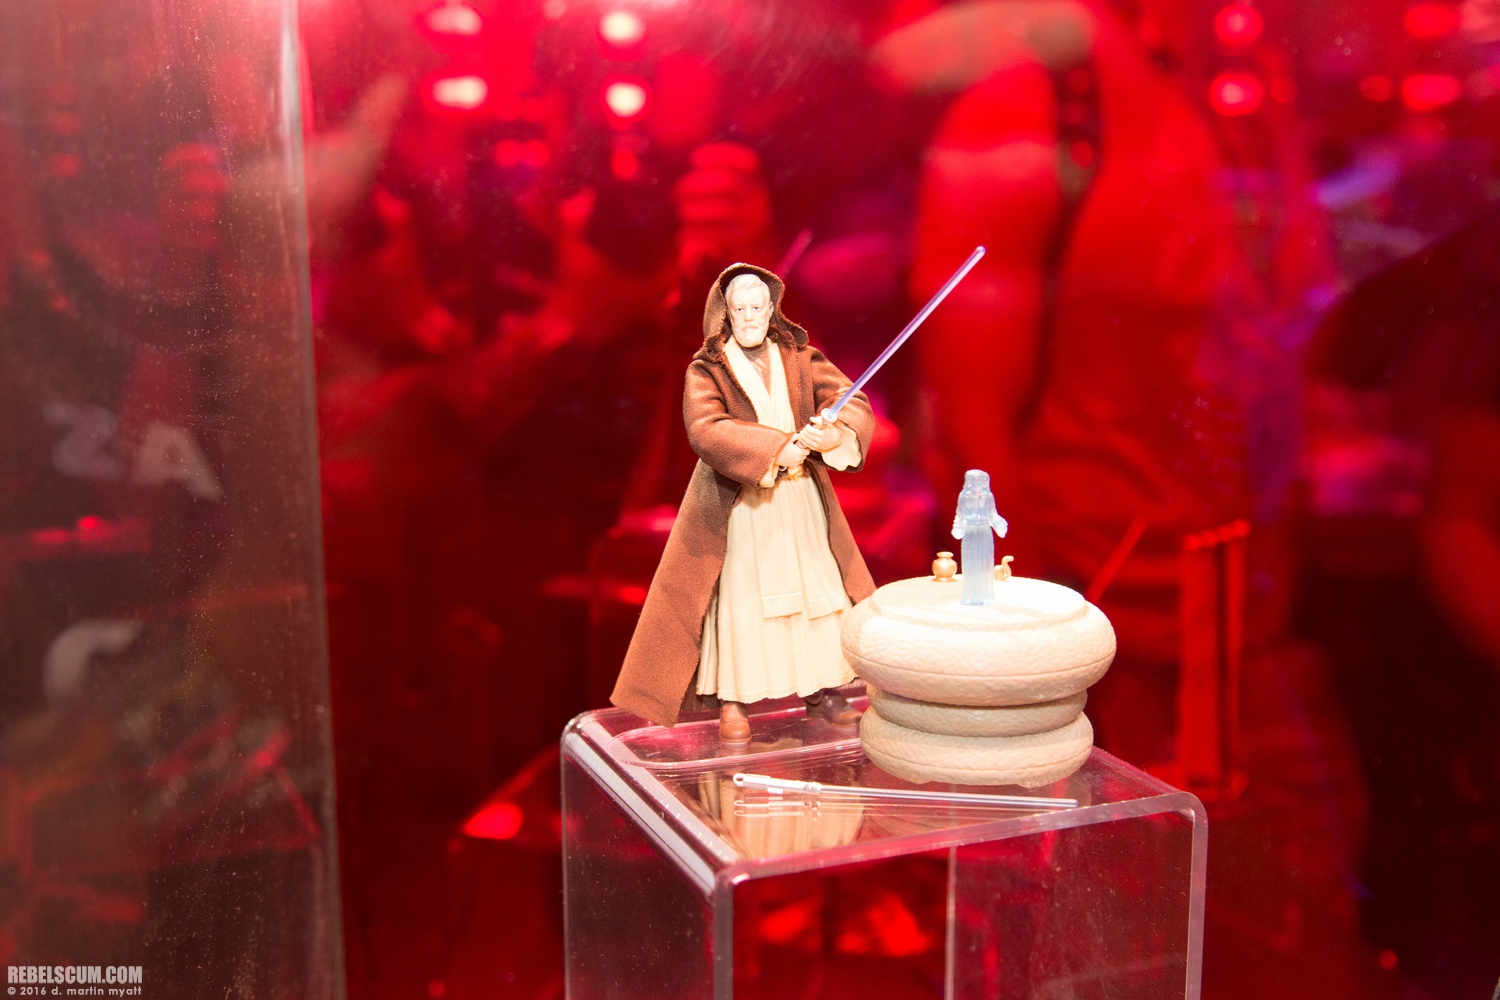 2016-SDCC-Sideshow-Collectibles-Star-Wars-062.jpg